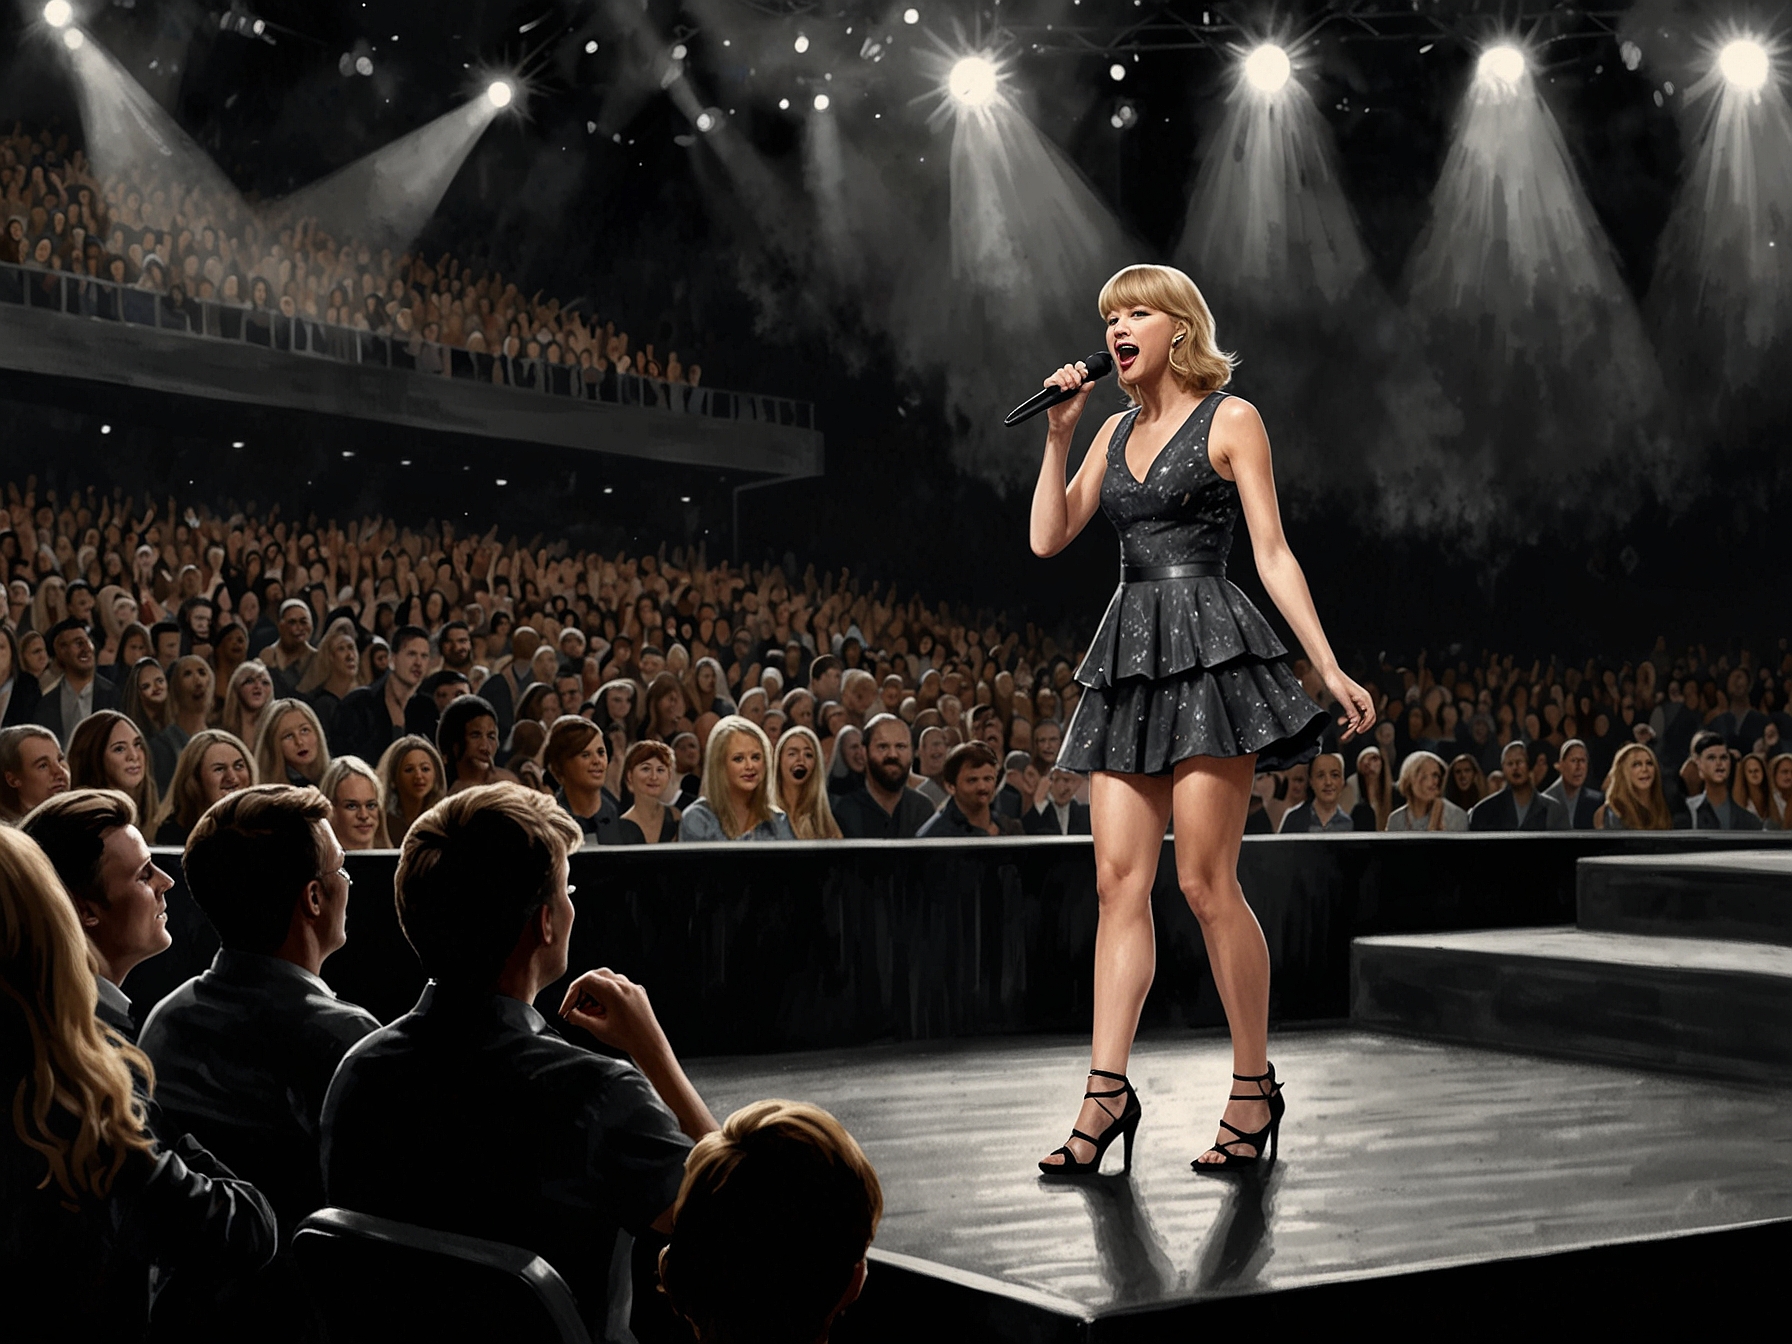 Taylor Swift performing on stage during her Eras Tour in Dublin, passionately sharing stories about how Ireland influenced her 'Folklore' album, captivating the audience with her storytelling.